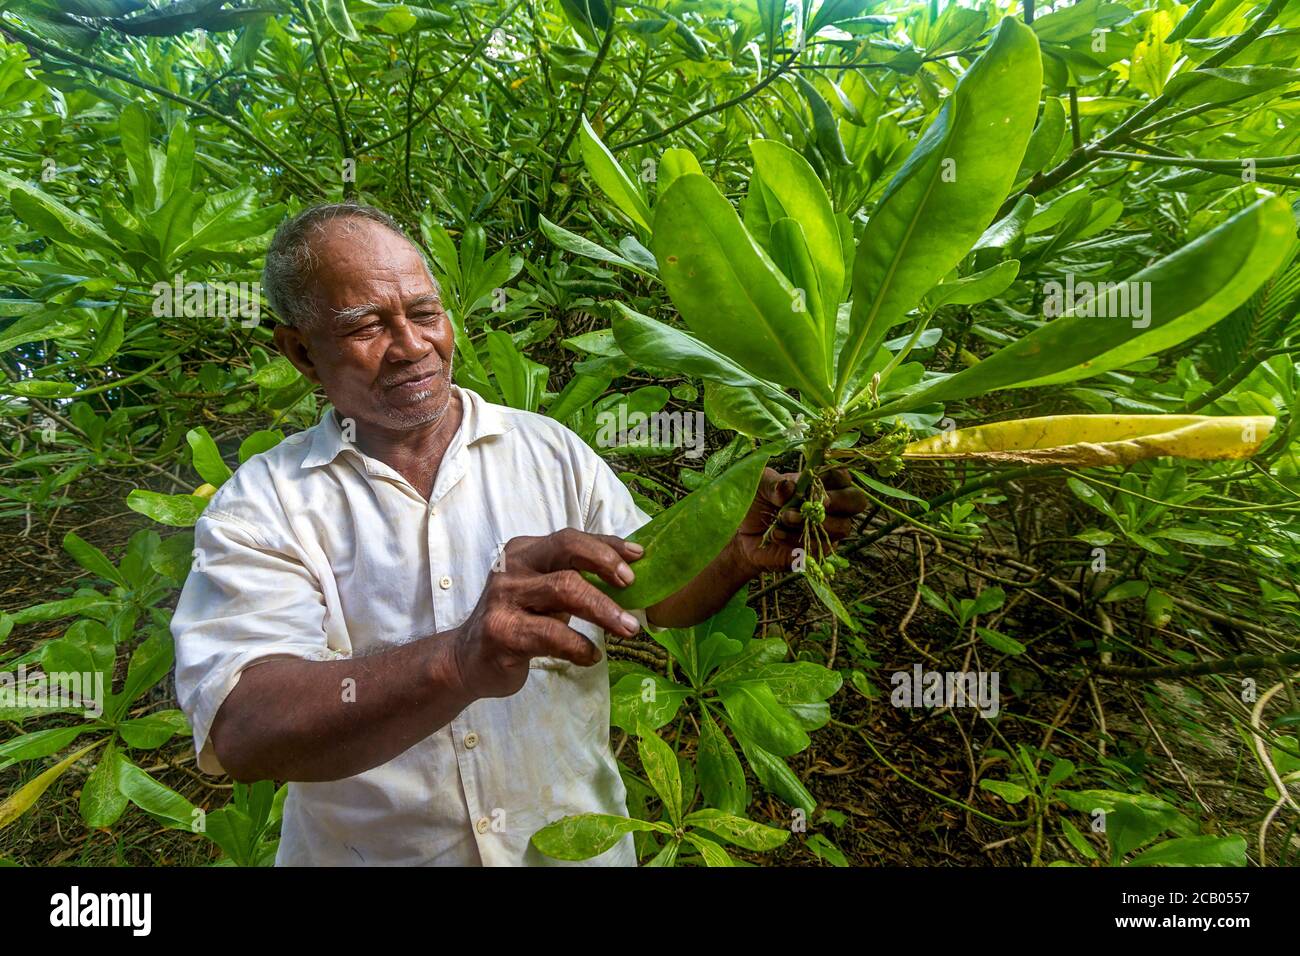 Local man shows mangrove tree that is used for medicinal purposes by people living on Kosrae, Micronesia. Juice from the berries is squeezed into the eye like an eye wash. The leaves are crushed and boiled to help ease asthma. Stock Photo